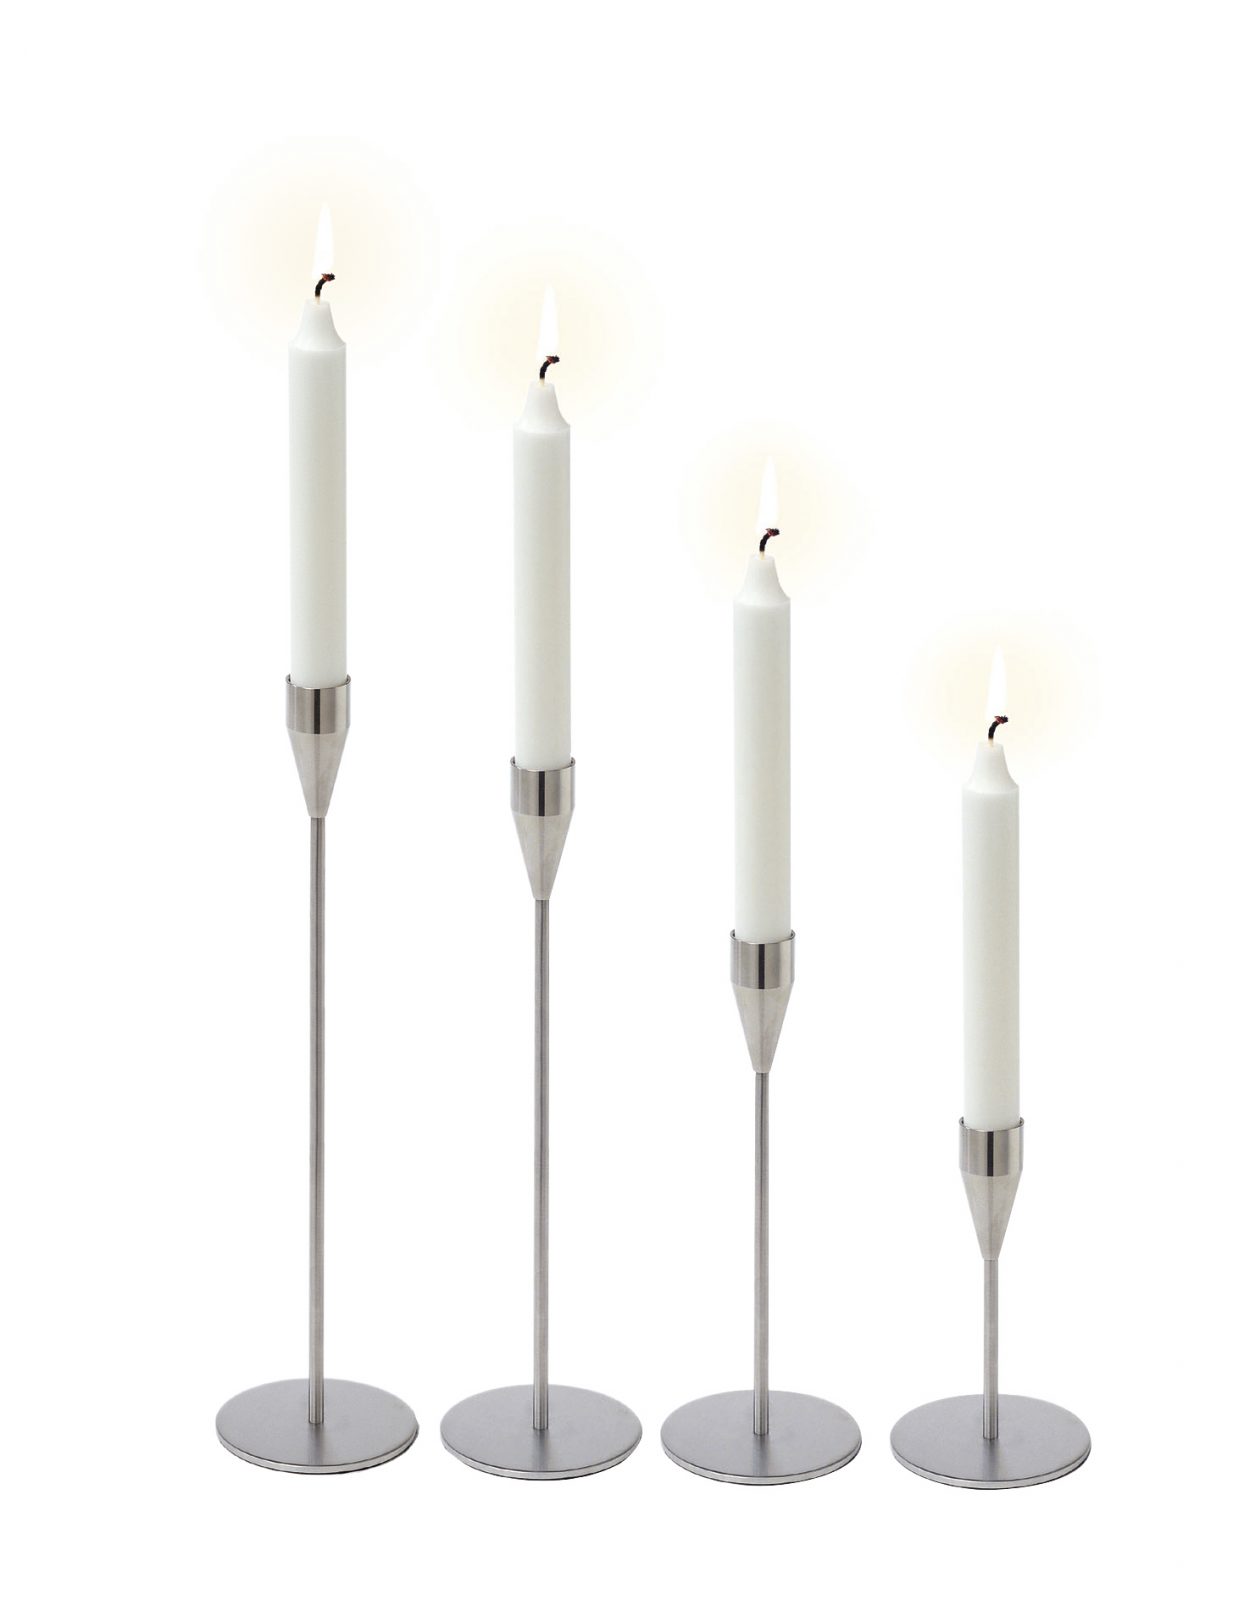 Buy Piet Heins Candle Holders at Nordic Urban's Webshop